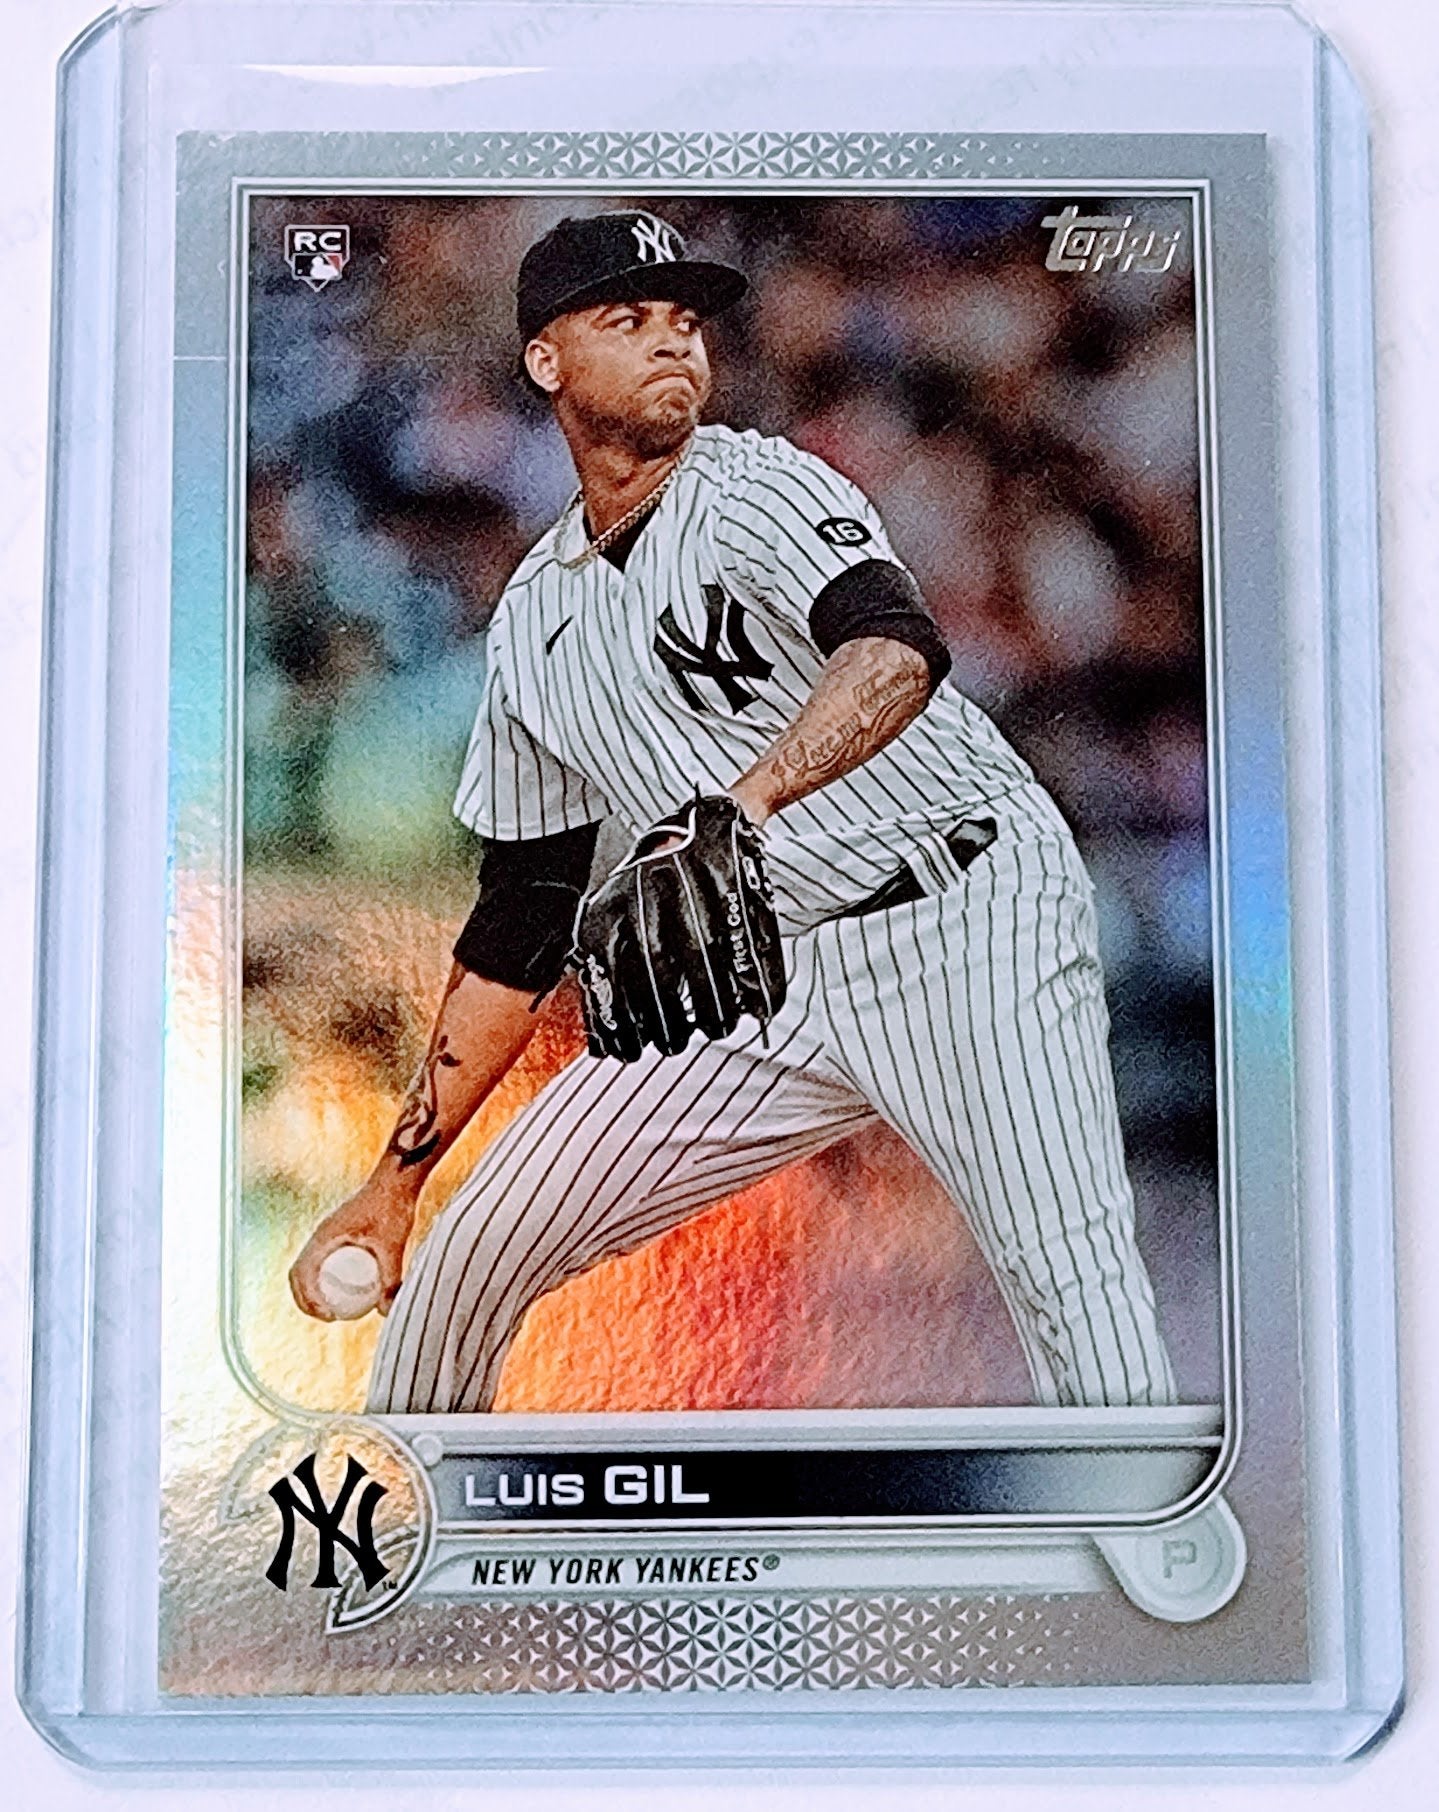 2022 Topps Luis Gil Foil Refractor Rookie Baseball Trading Card GRB1 simple Xclusive Collectibles   